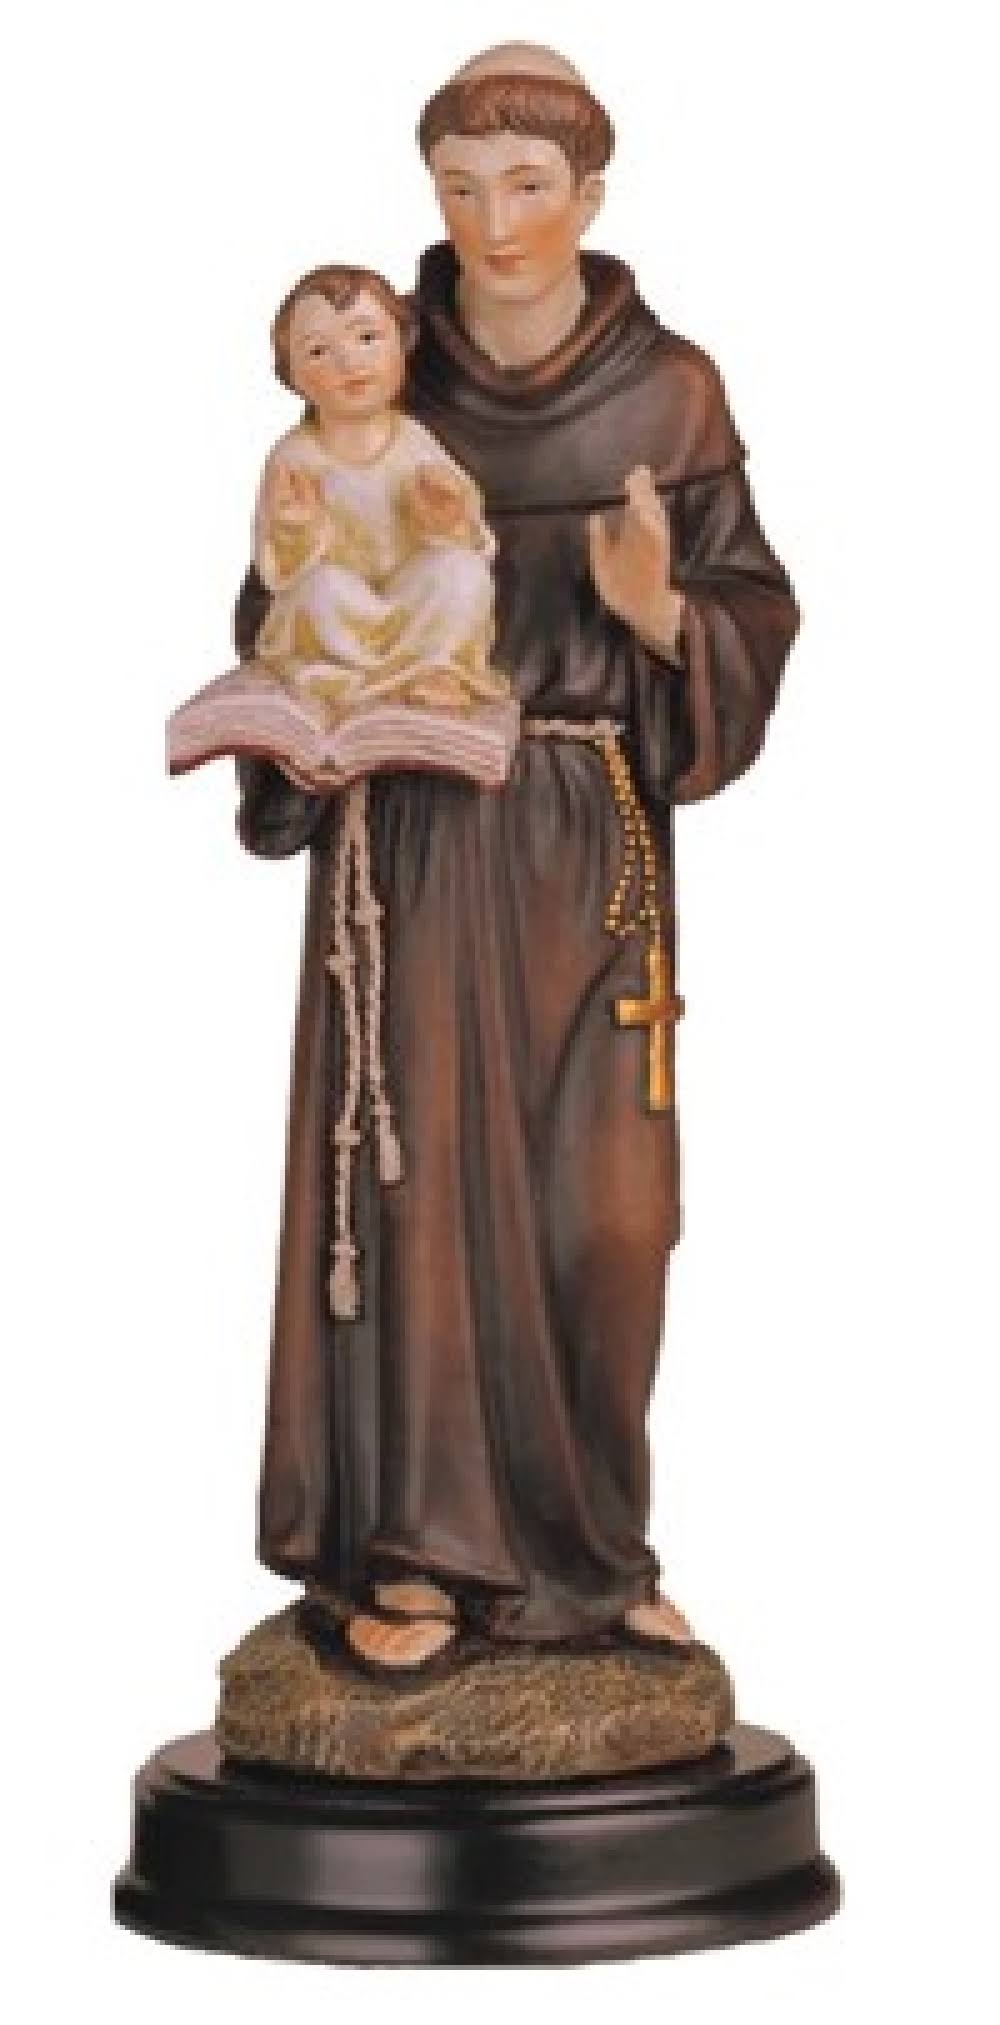 George S. Chen Imports Ss-g-205.09 Saint Anthony Holy Figurine Religious Decoration Statue Decor, 5"